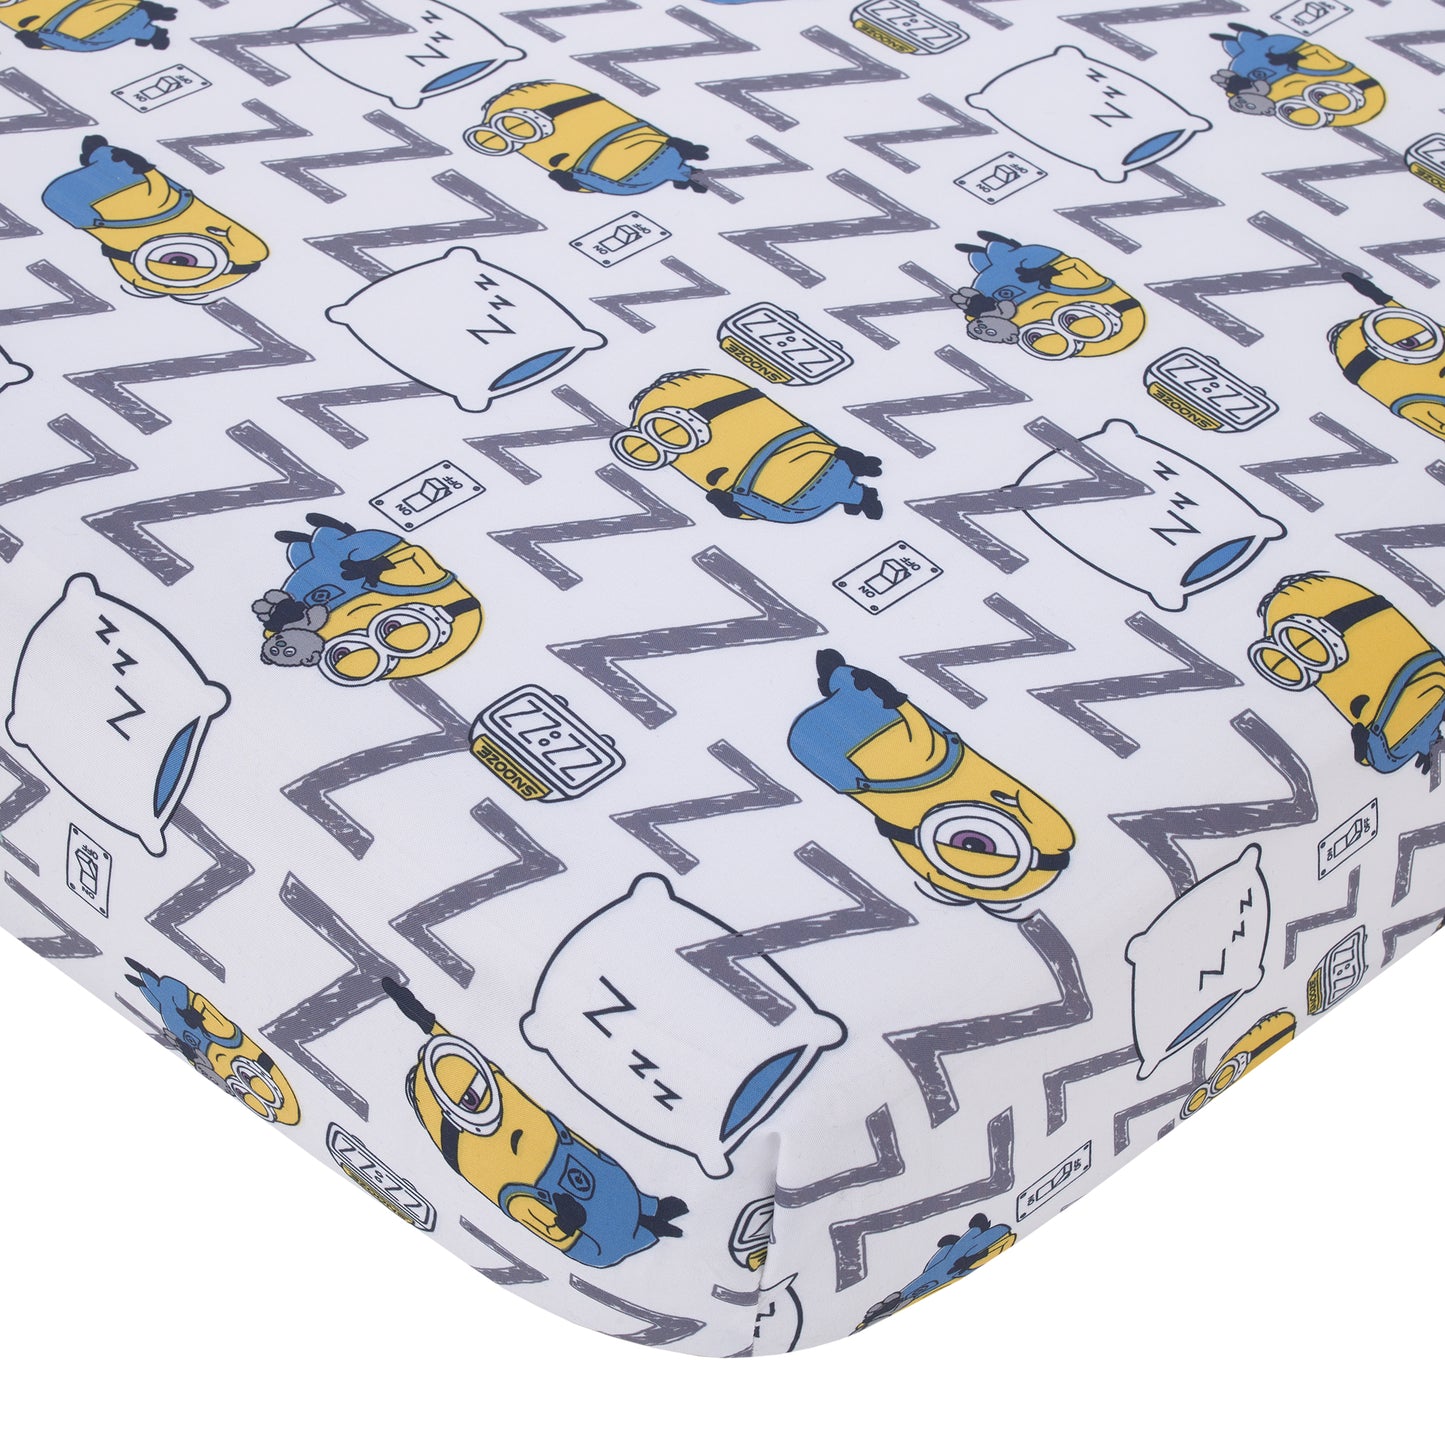 Illumination Lazy Minions Club Gray, Blue, Yellow, and White Let Me Sleep 4 Piece Toddler Bed Set - Comforter, Fitted Bottom Sheet, Flat Top Sheet, and Reversible Pillowcase